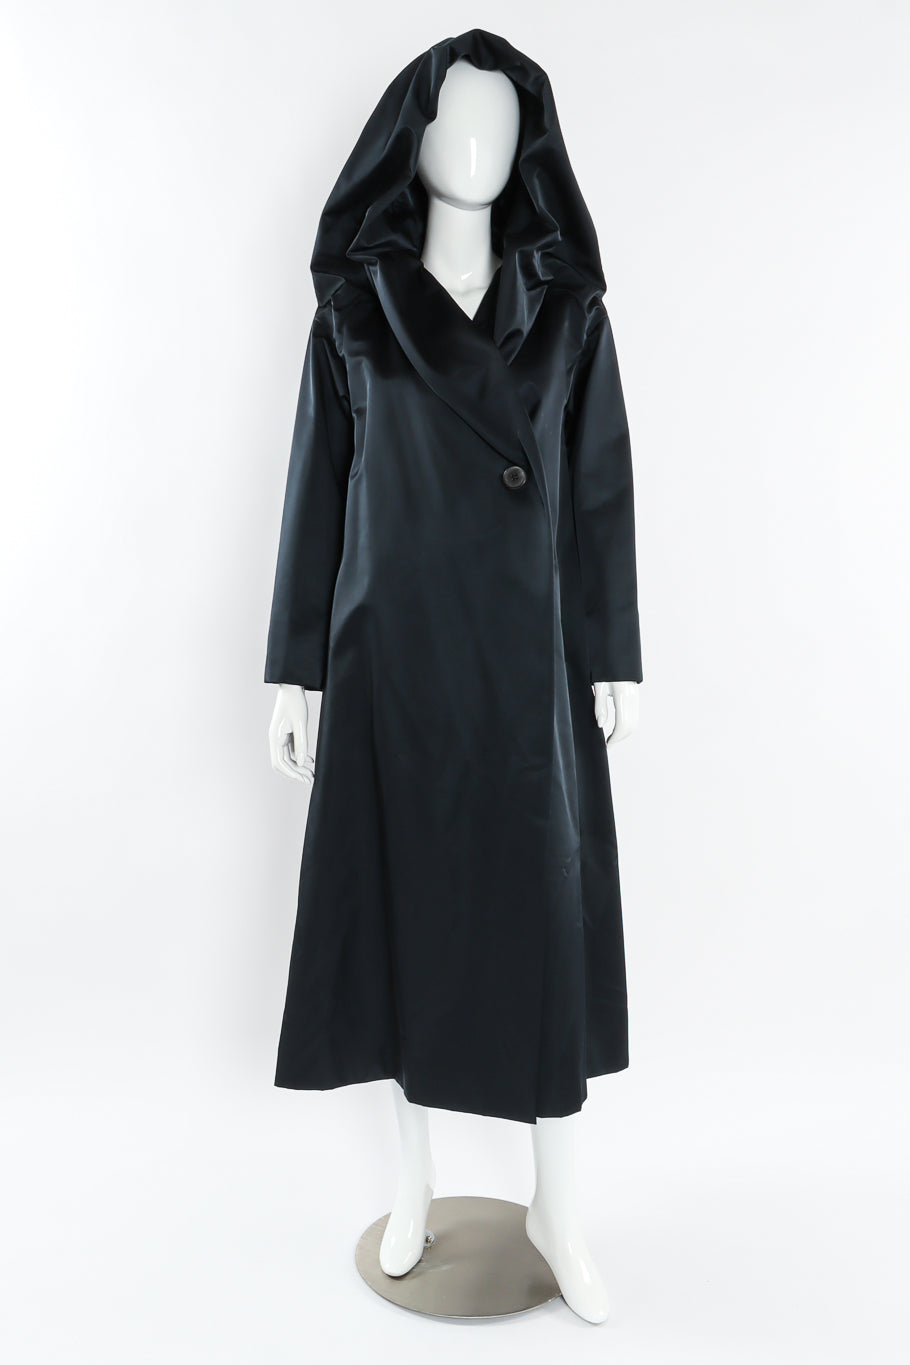 Vintage Issey Miyake Hooded Satin Overcoat mannequin front with hood @ Recess LA